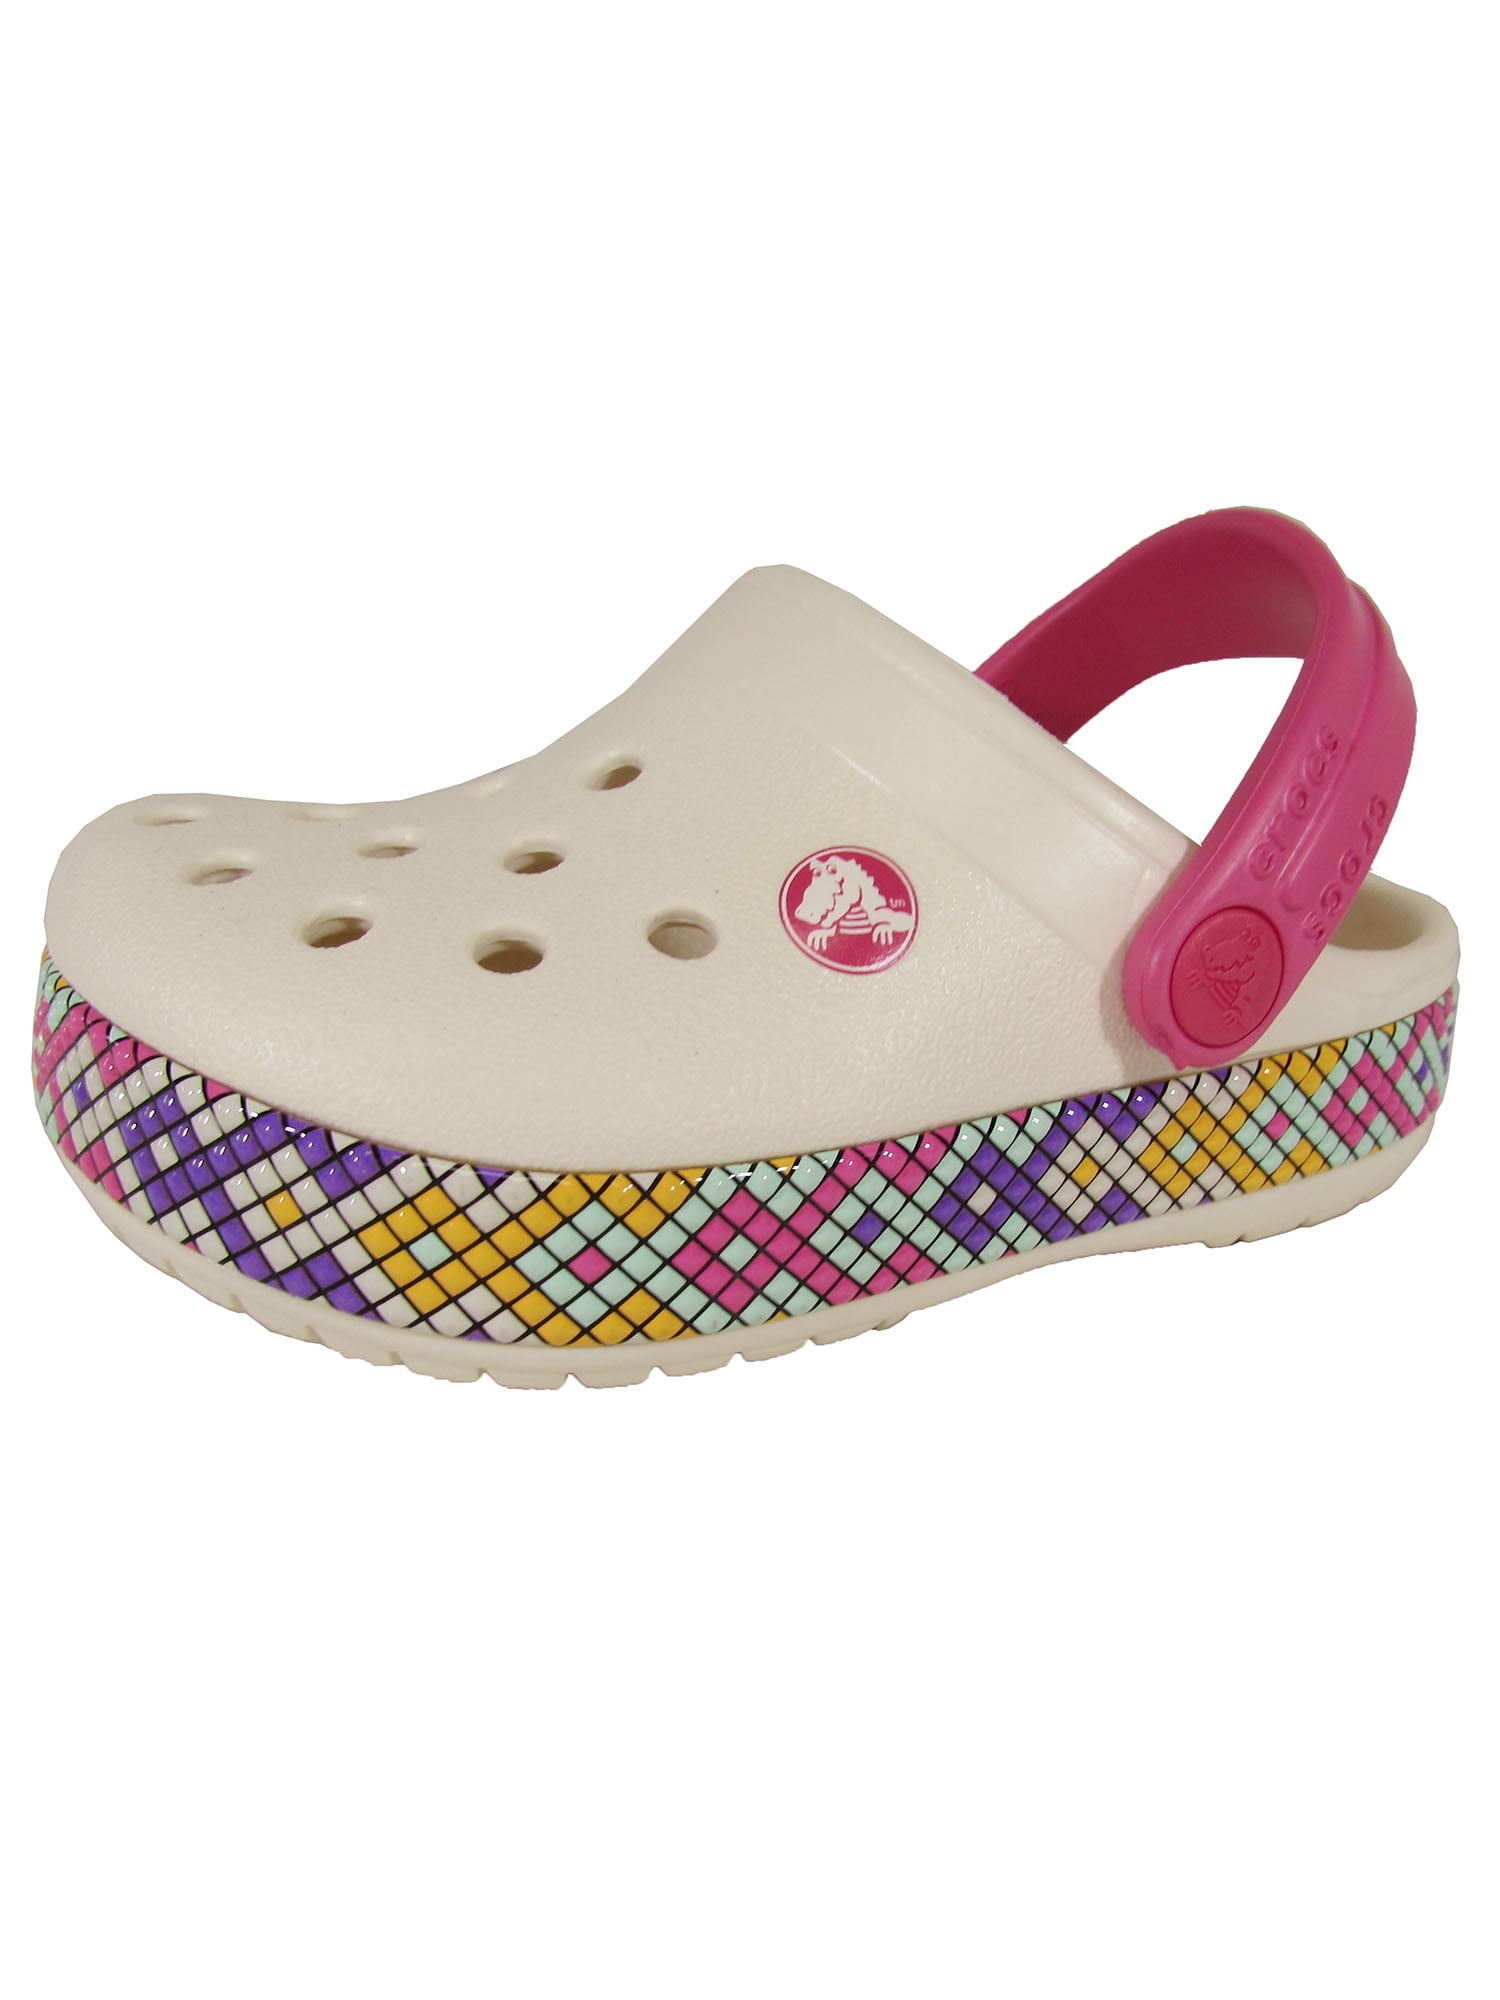 Crocs Crocband Clogs Oyster Off-White beach shoes various sizes 